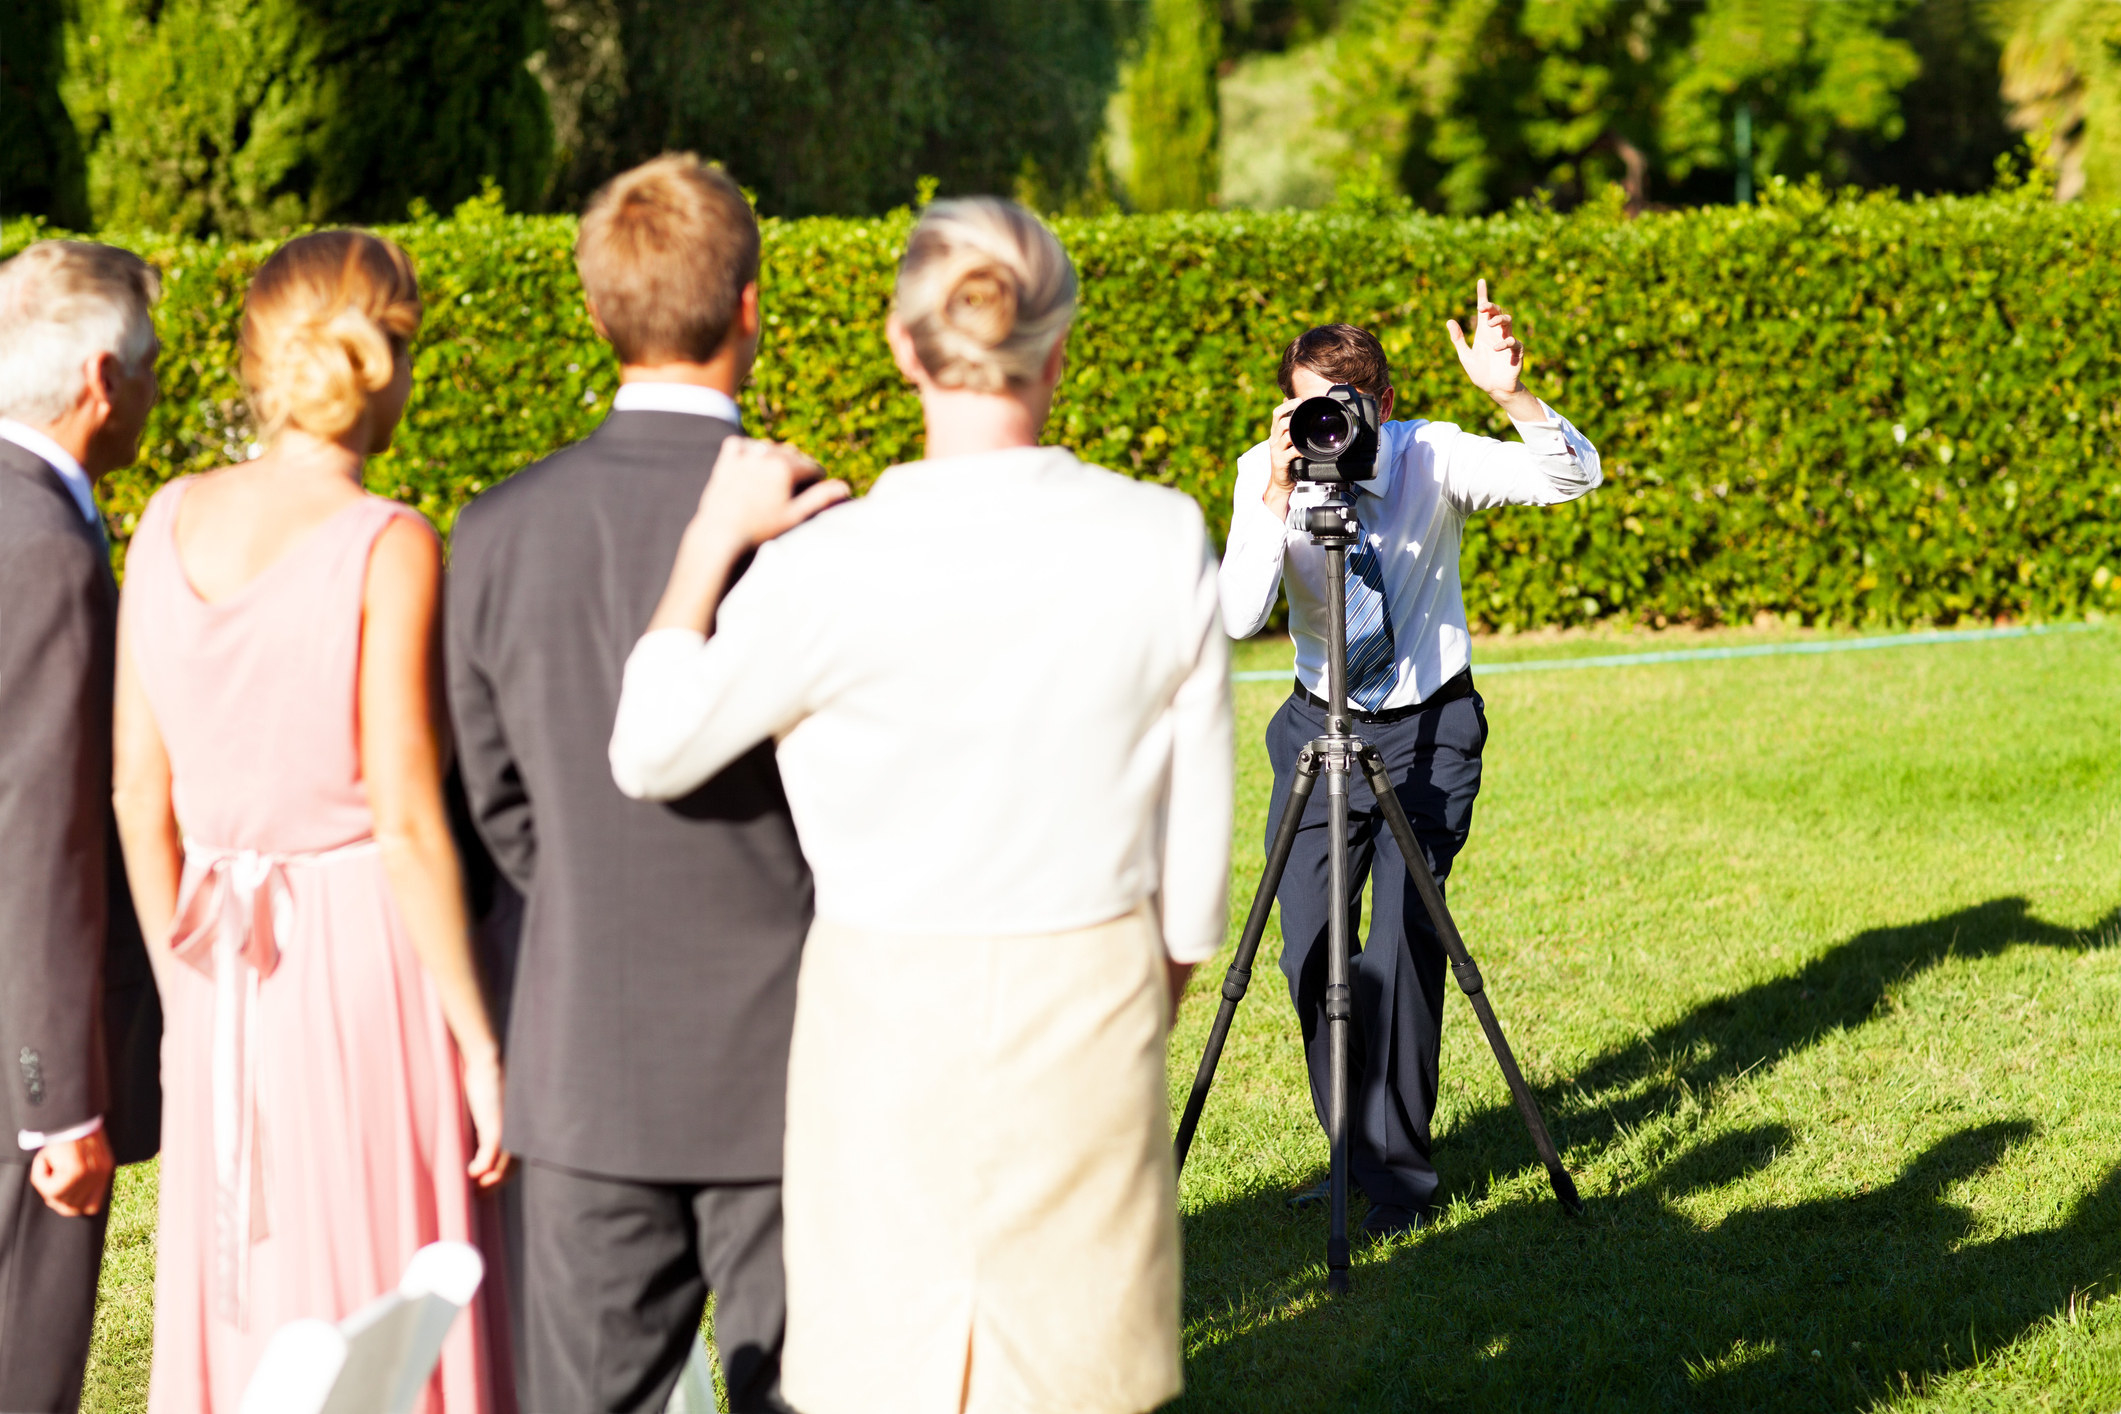 a photographer taking a photo of the wedding family